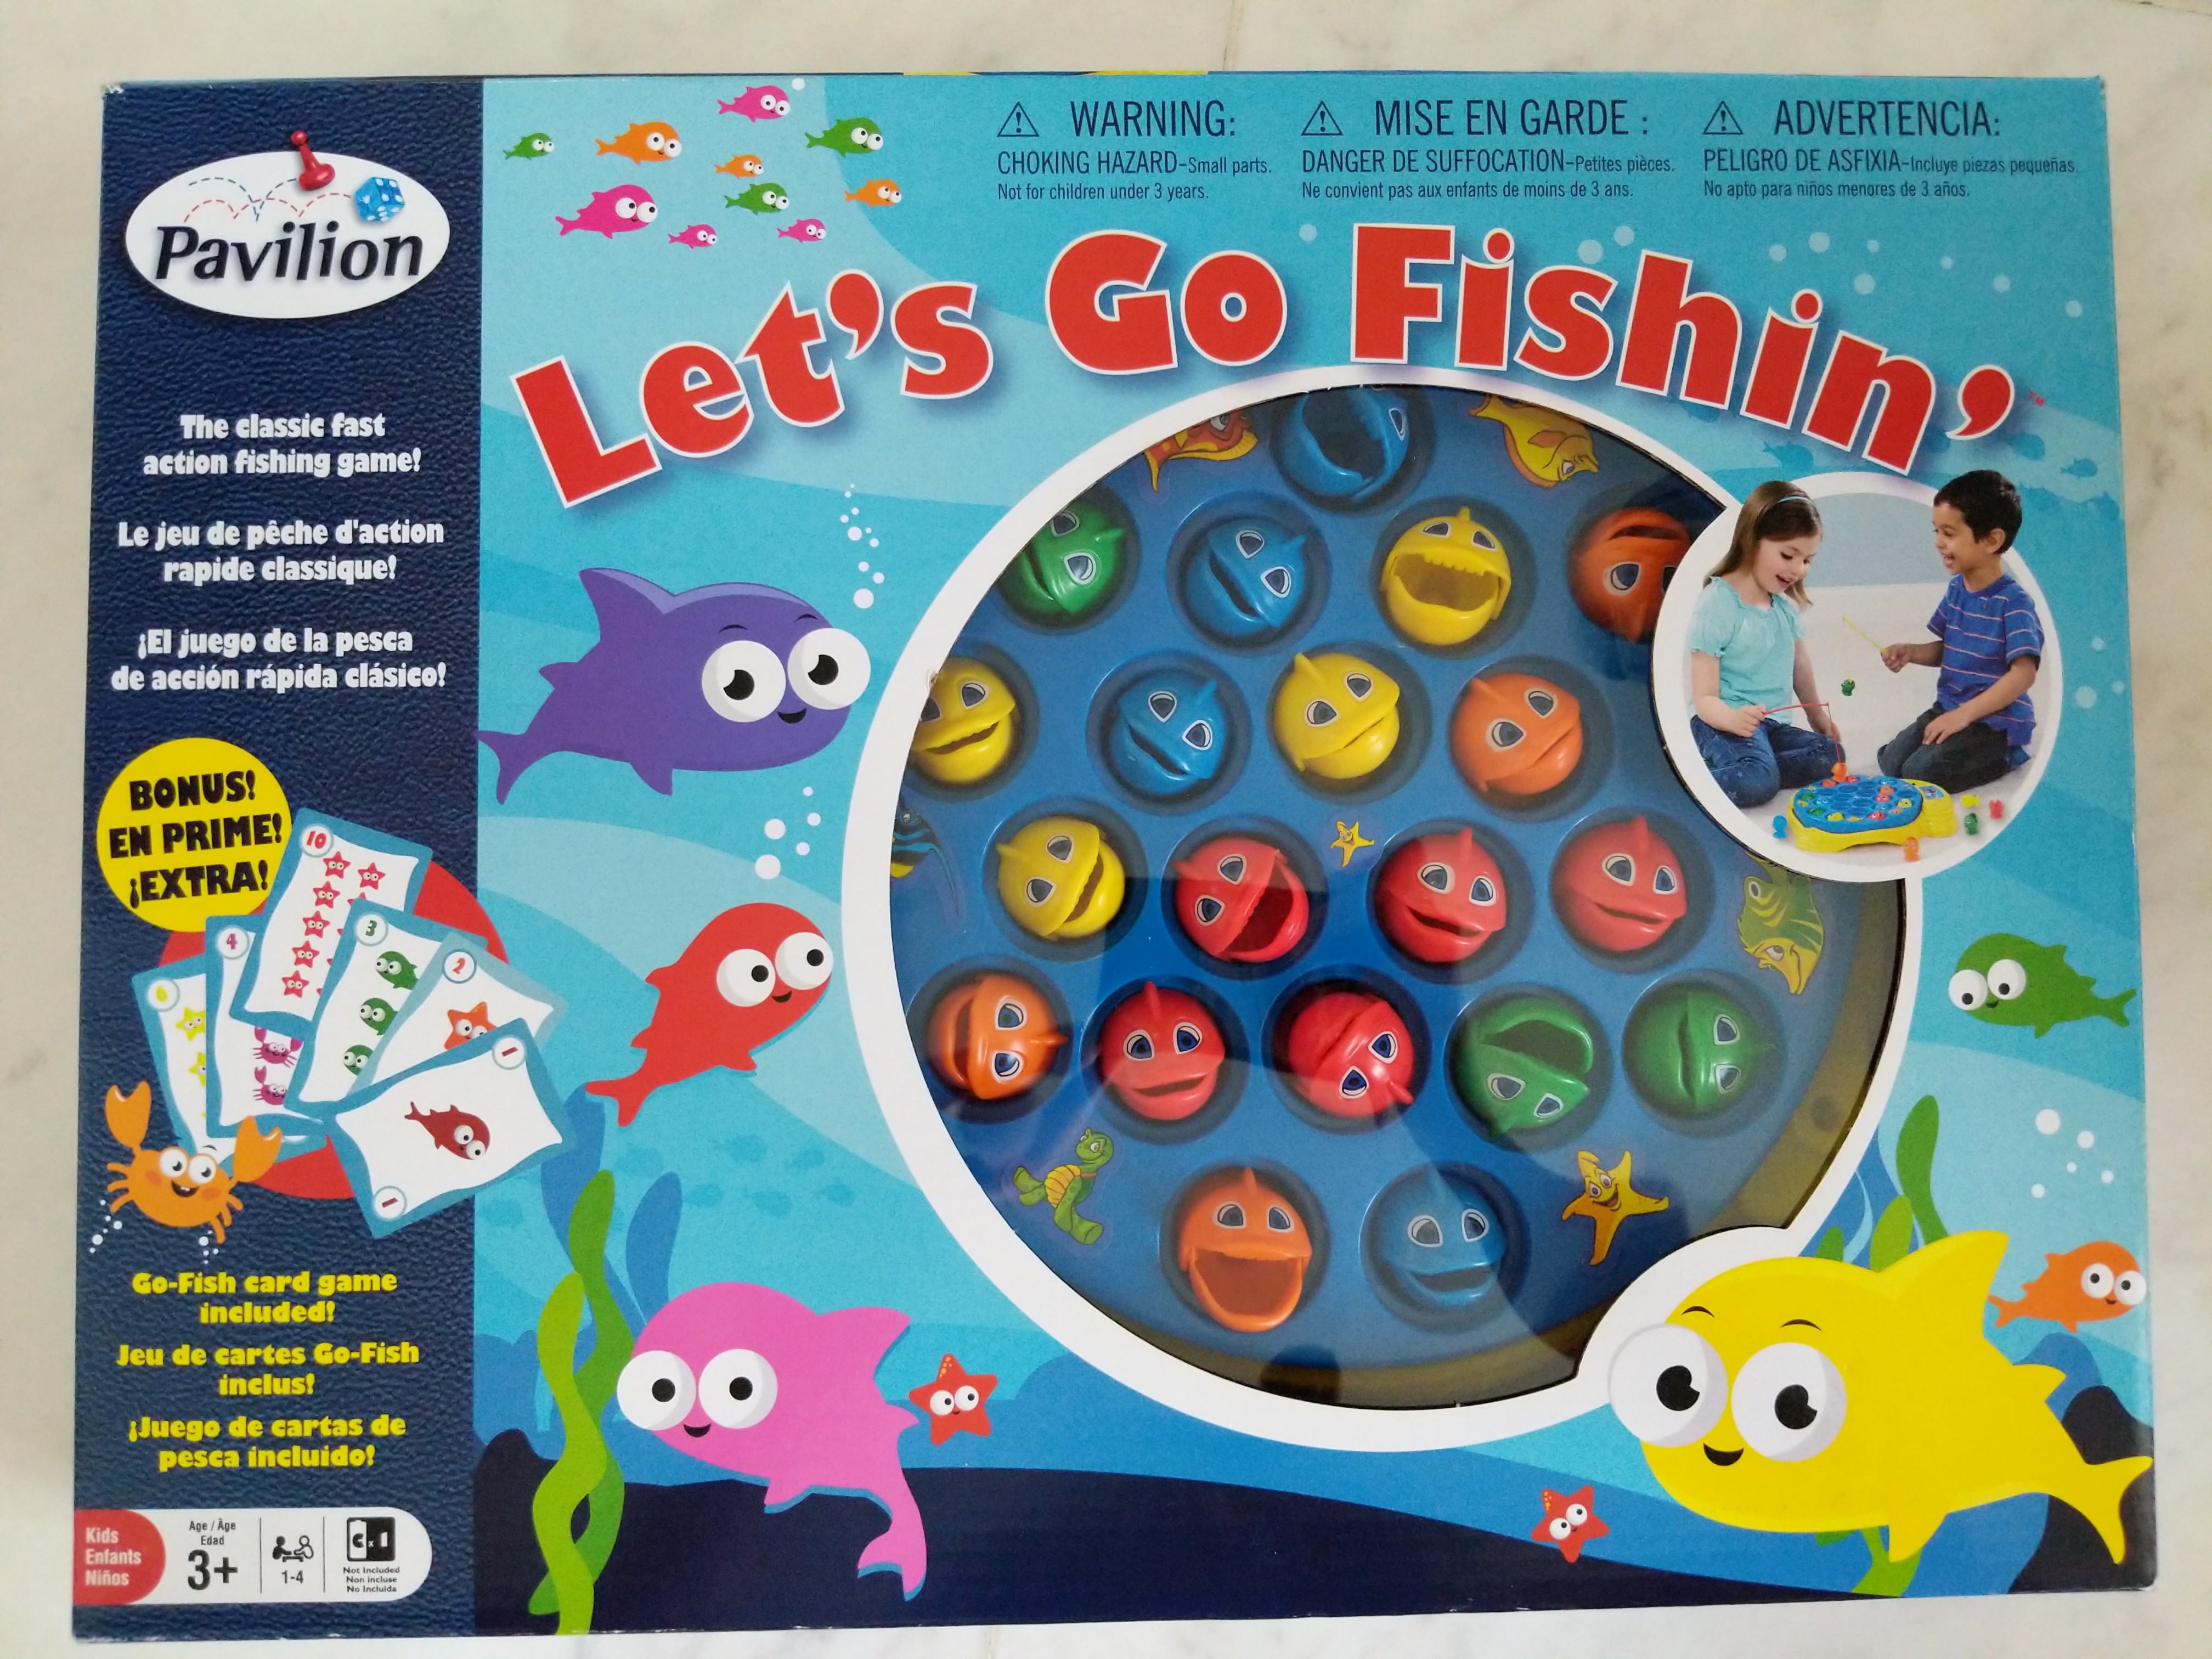 https://media.karousell.com/media/photos/products/2018/07/01/almost_new_toysrus_pavilion_lets_go_fishing_game_1530410396_1963e8b1.jpg